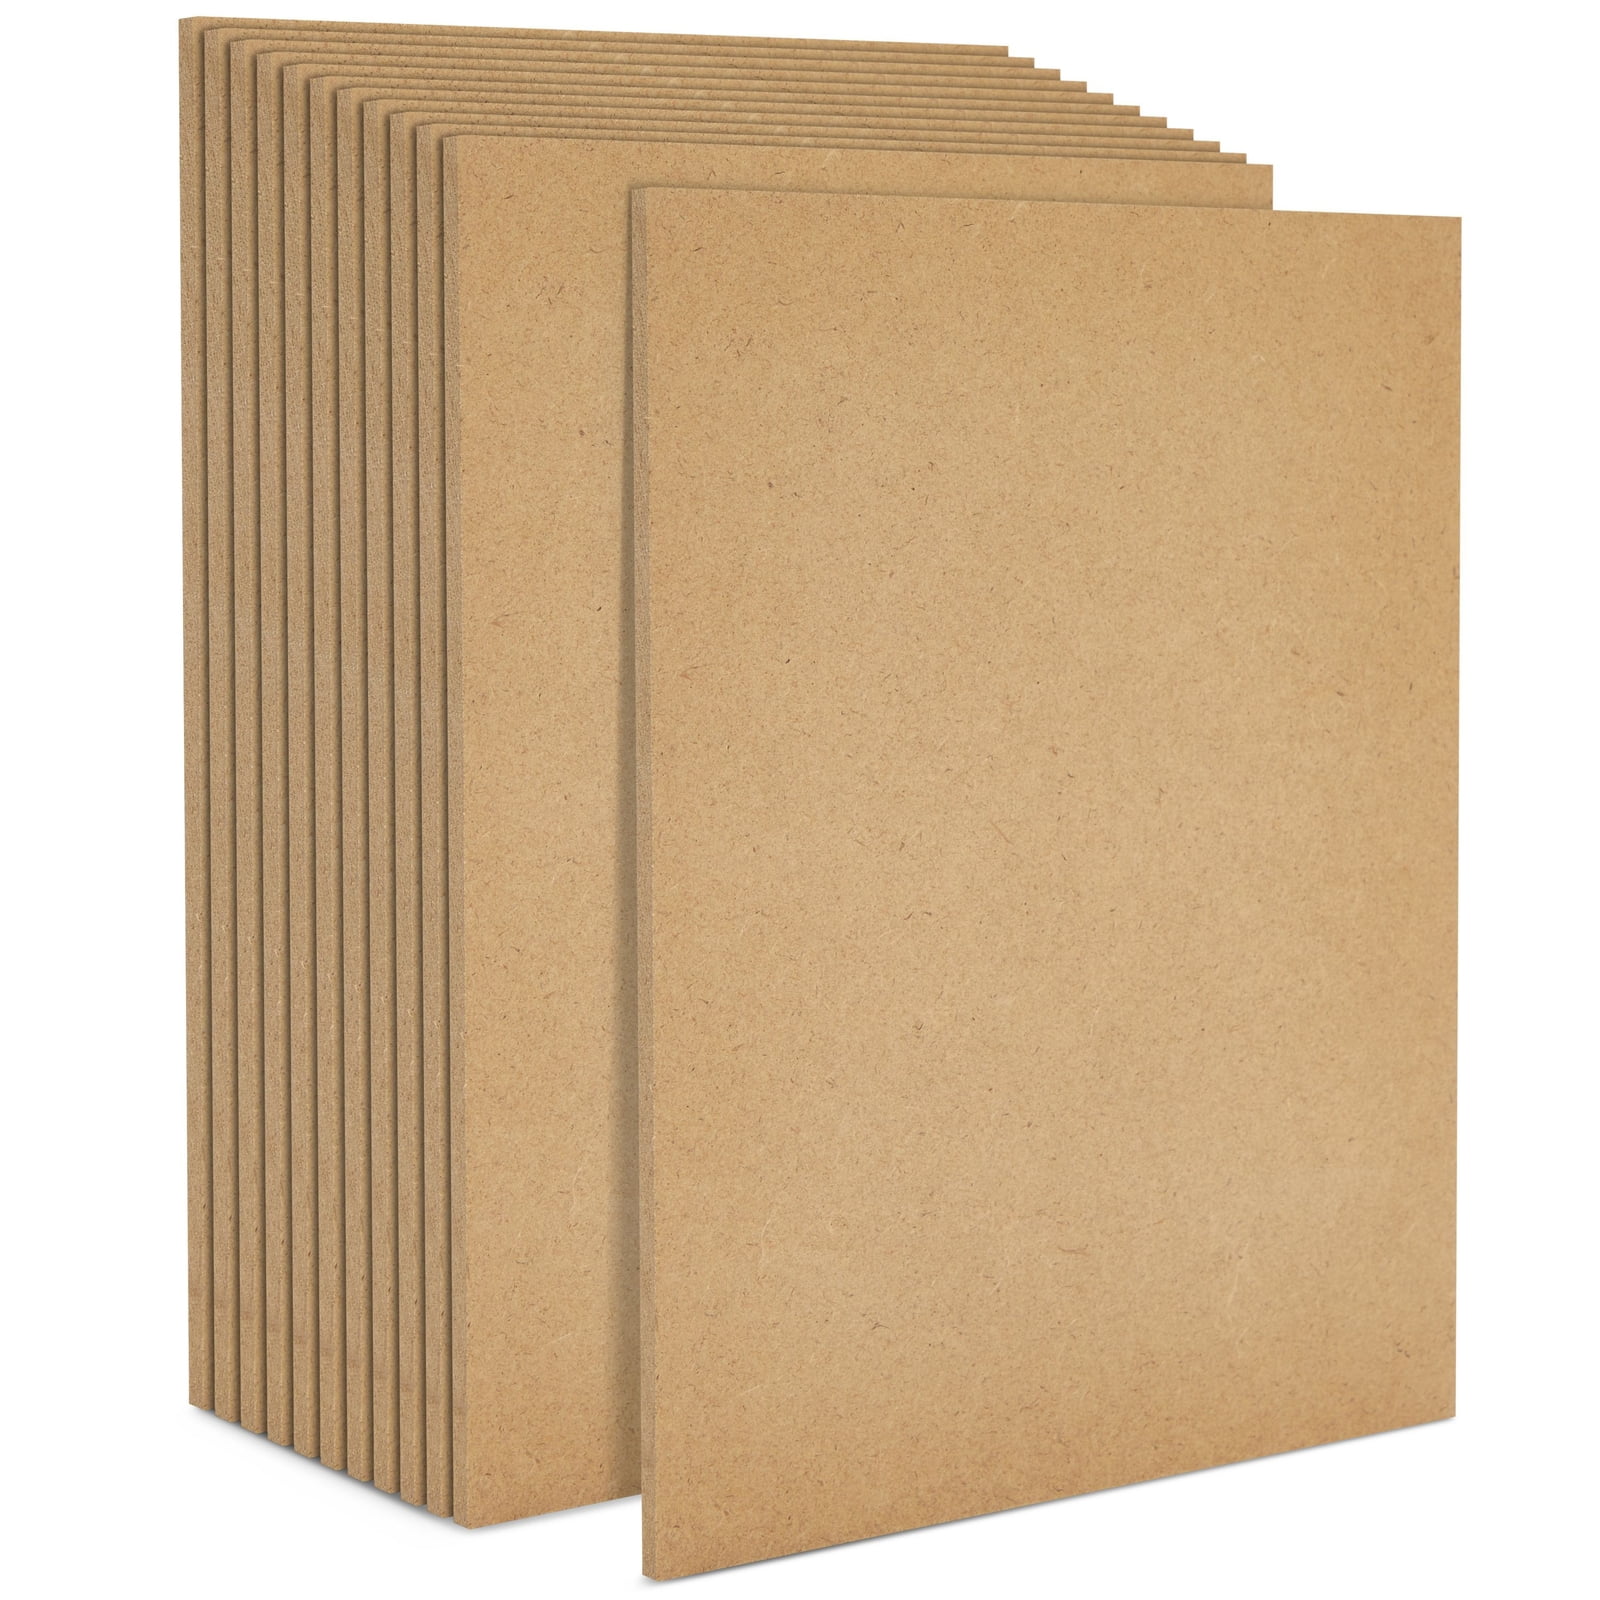 0.25 Thick Blank MDF Chipboard Sheets for Painting, Arts and Crafts (8 x  10 In, 12 Pack) 